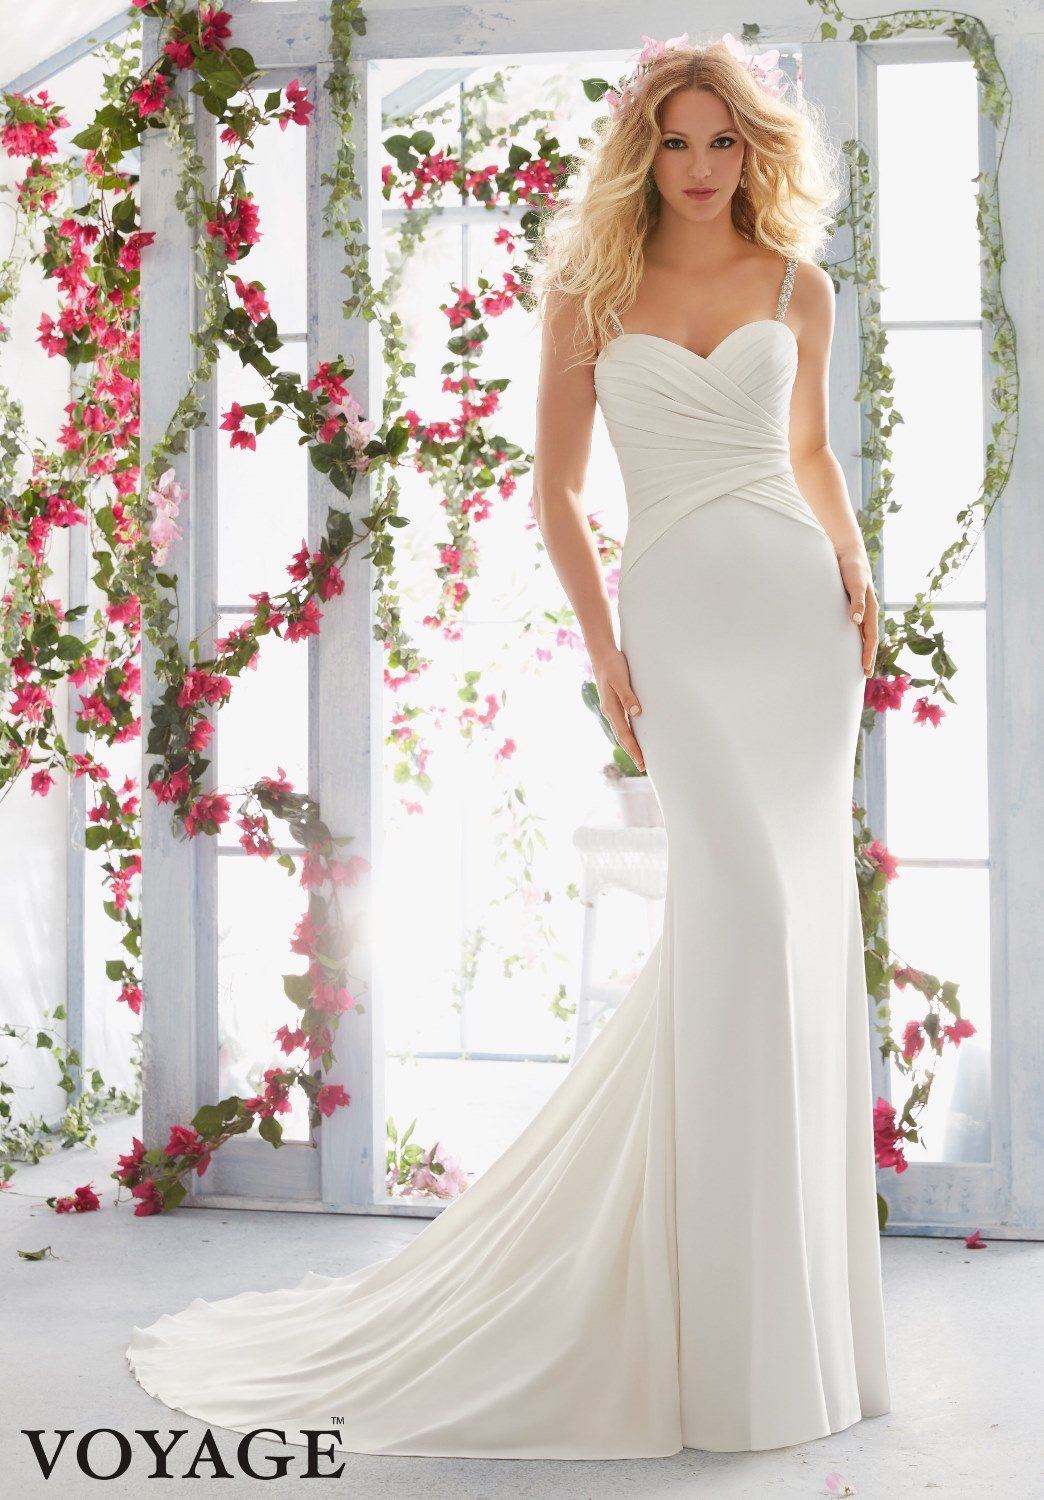 Mexico Wedding Dresses: How to Choose the Right Style